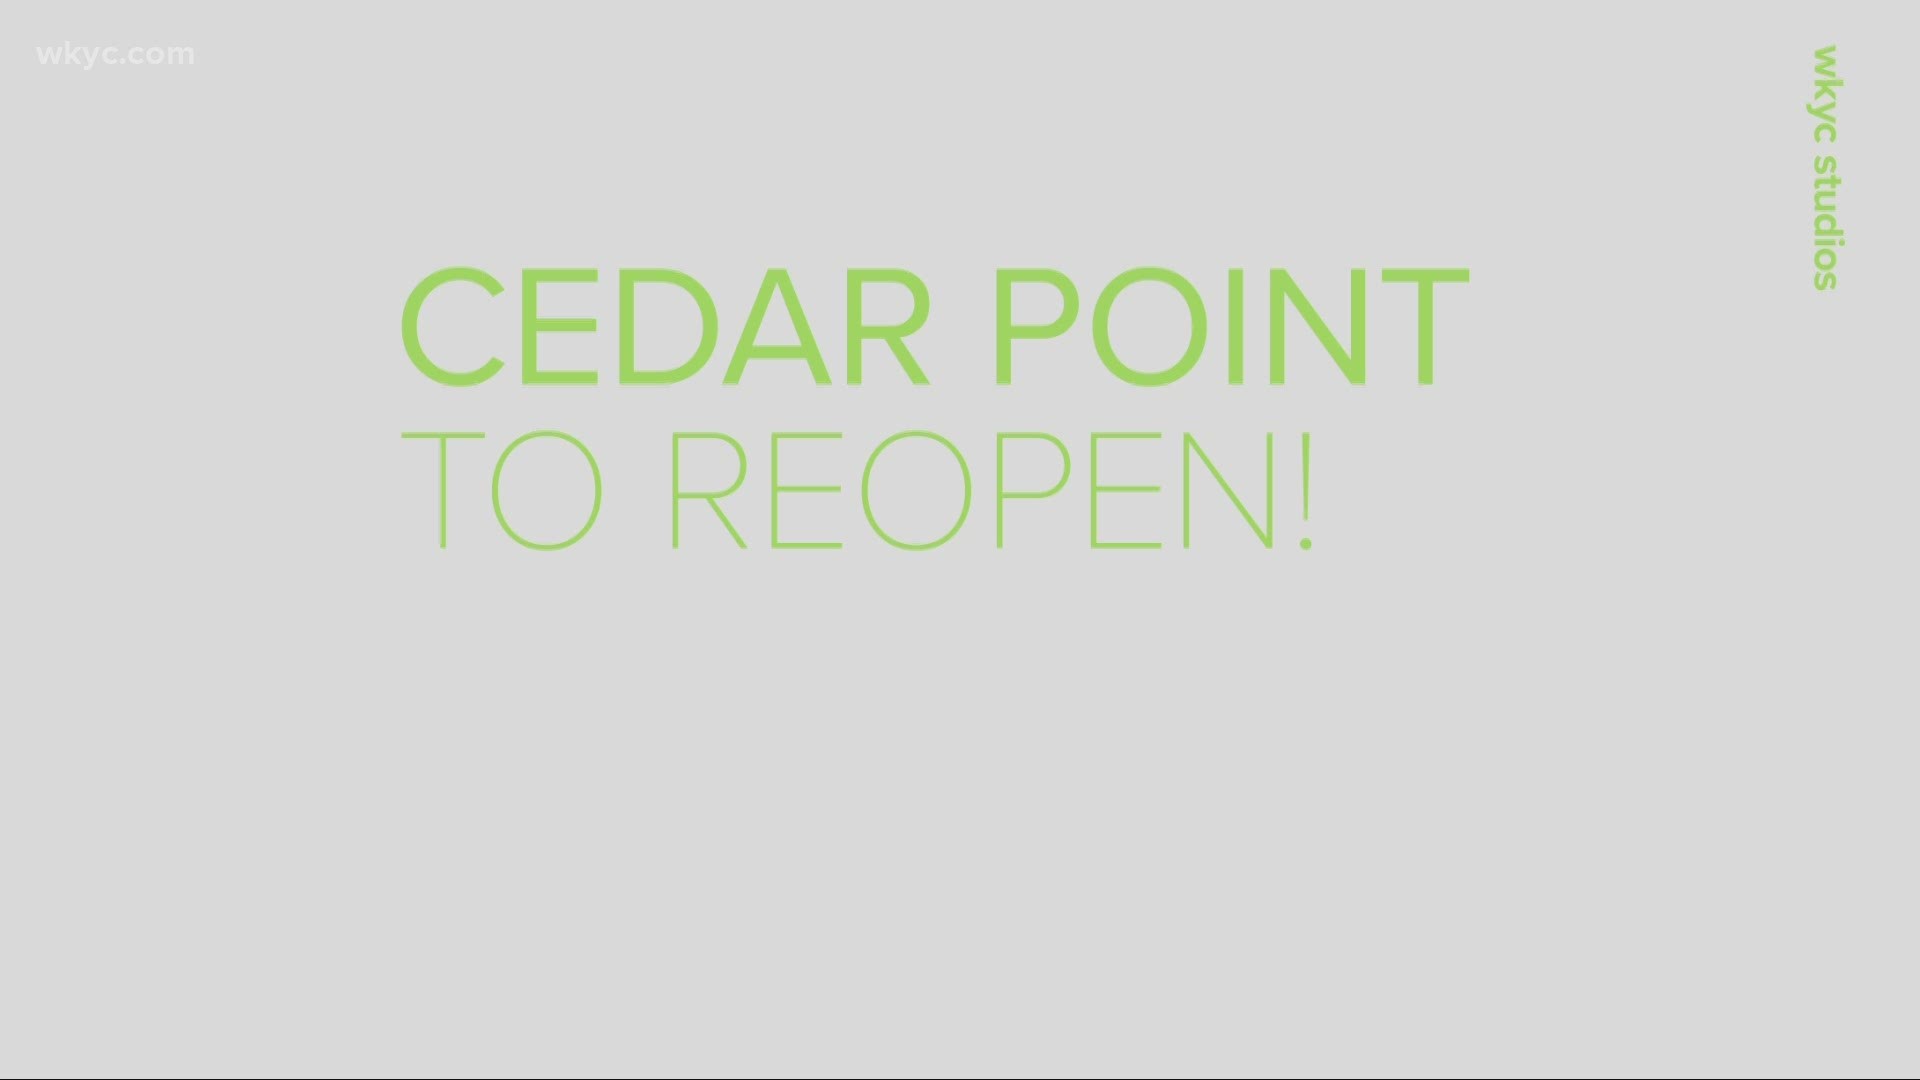 No exact date has been set.  However, Cedar Point will reopen at some point this season.